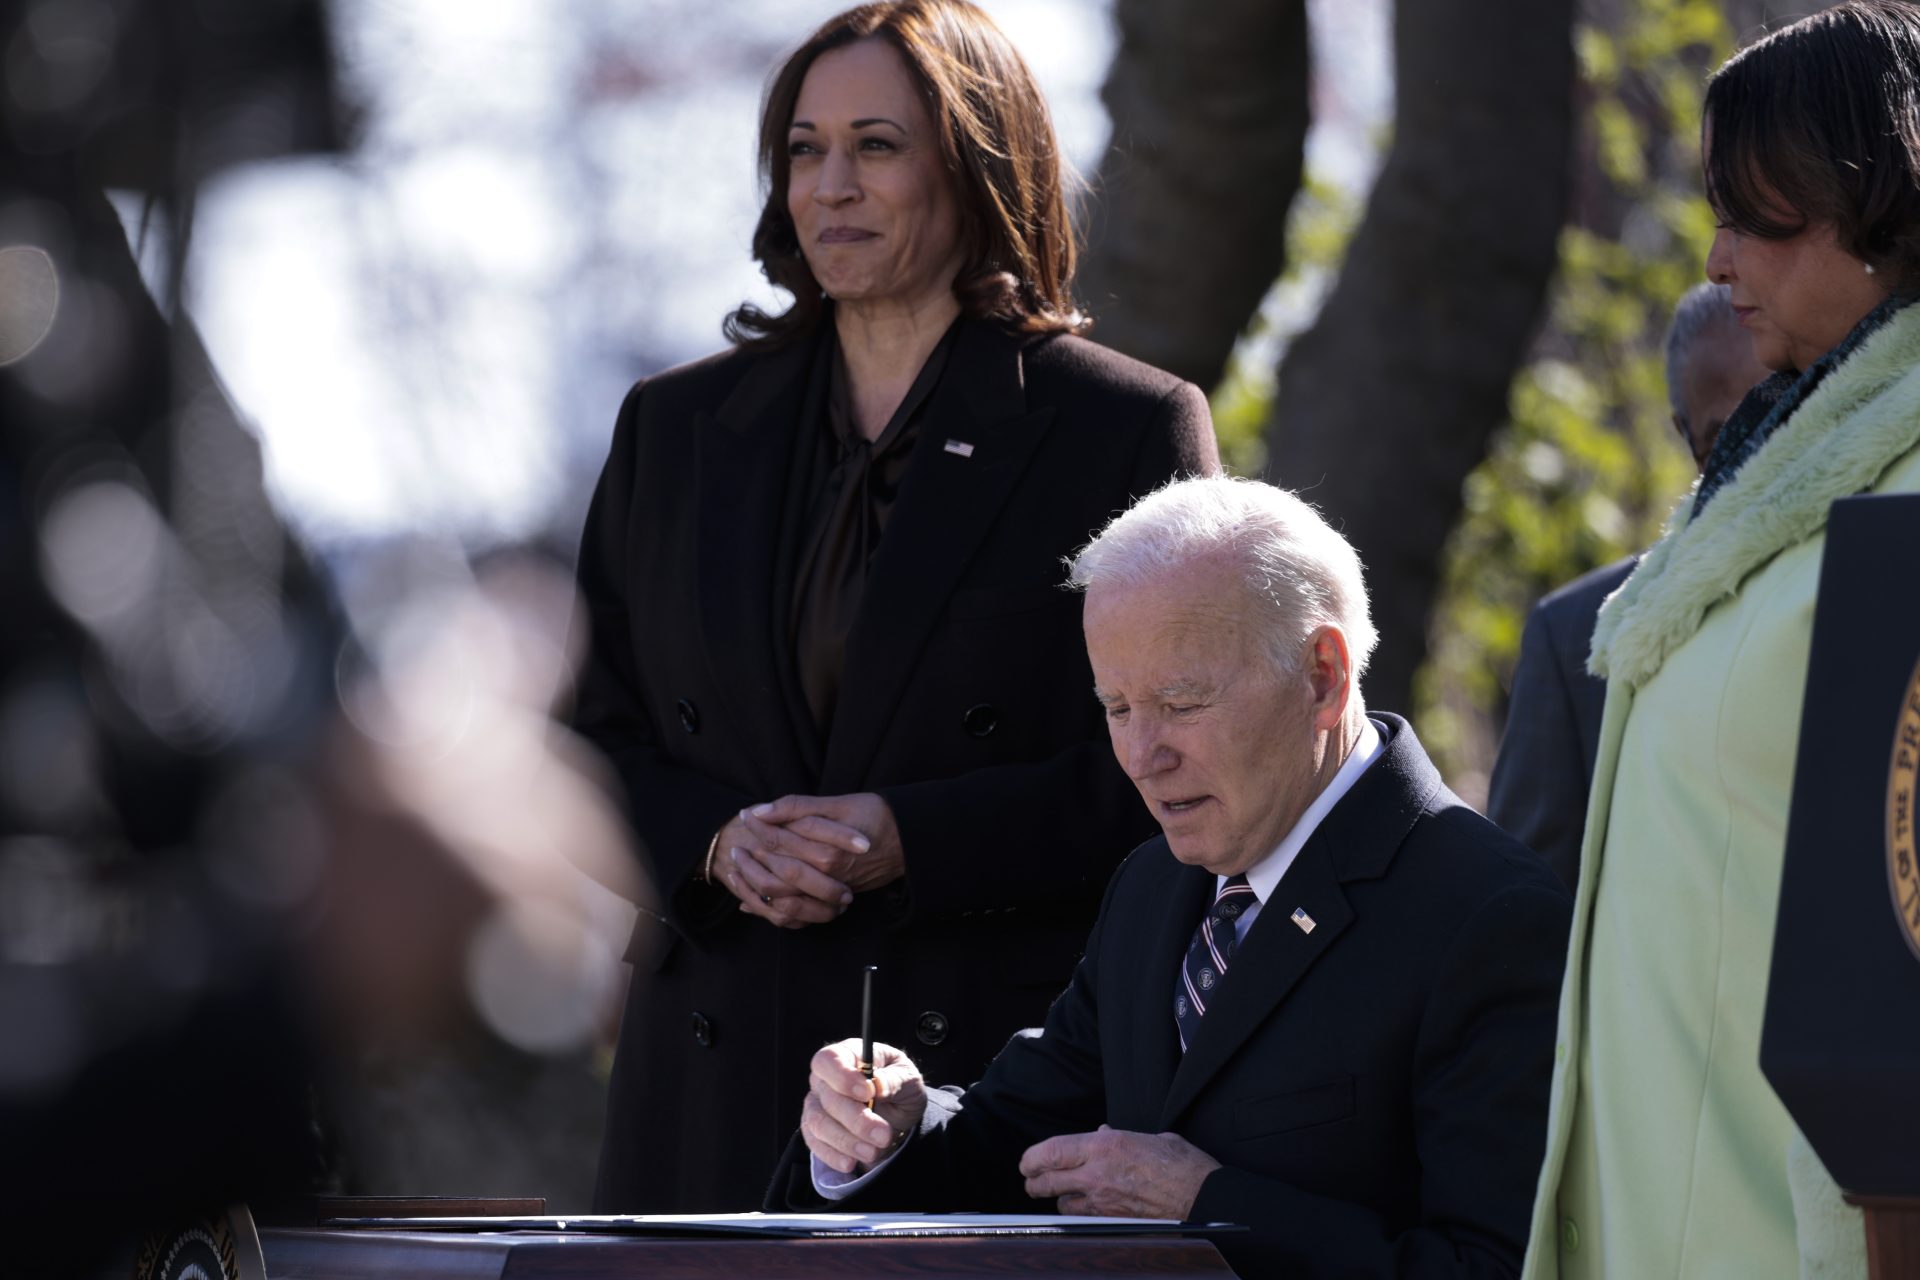 President Joe Biden officially signed the Emmett Till Anti-Lynching Act into law on Tuesday making lynching a federal hate crime.